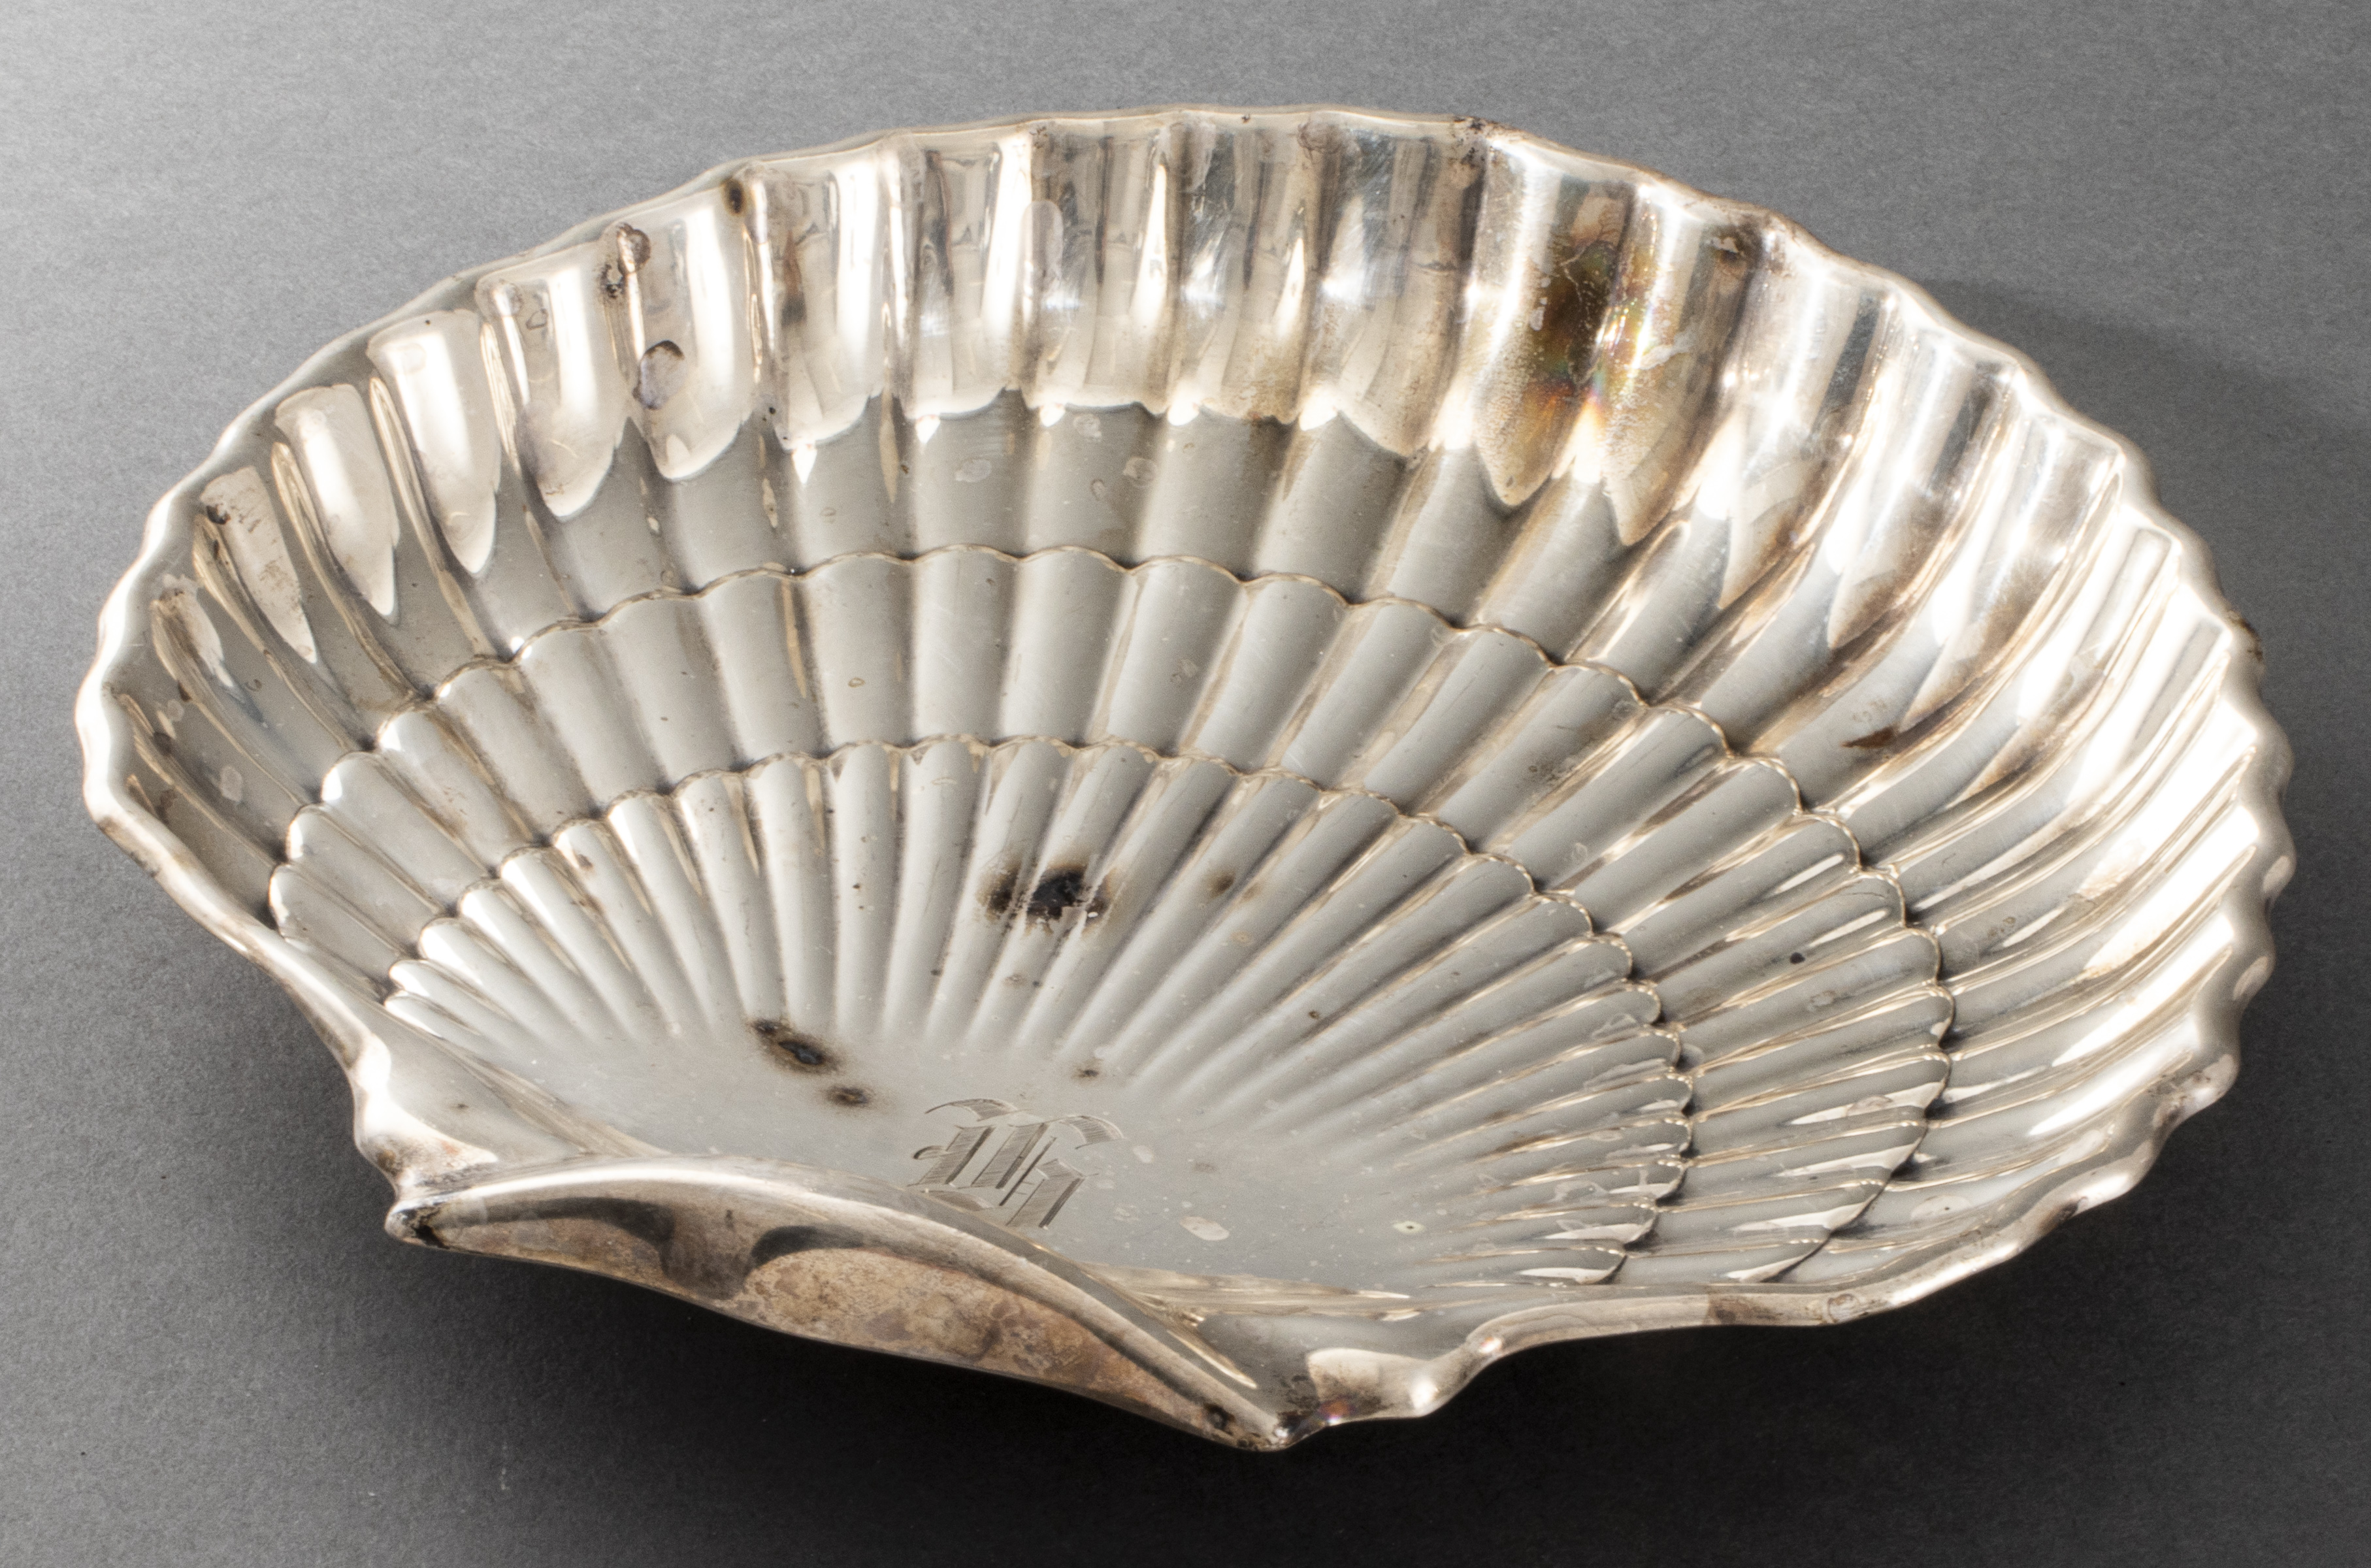 GORHAM STERLING SILVER LARGE SHELL 3c47e8